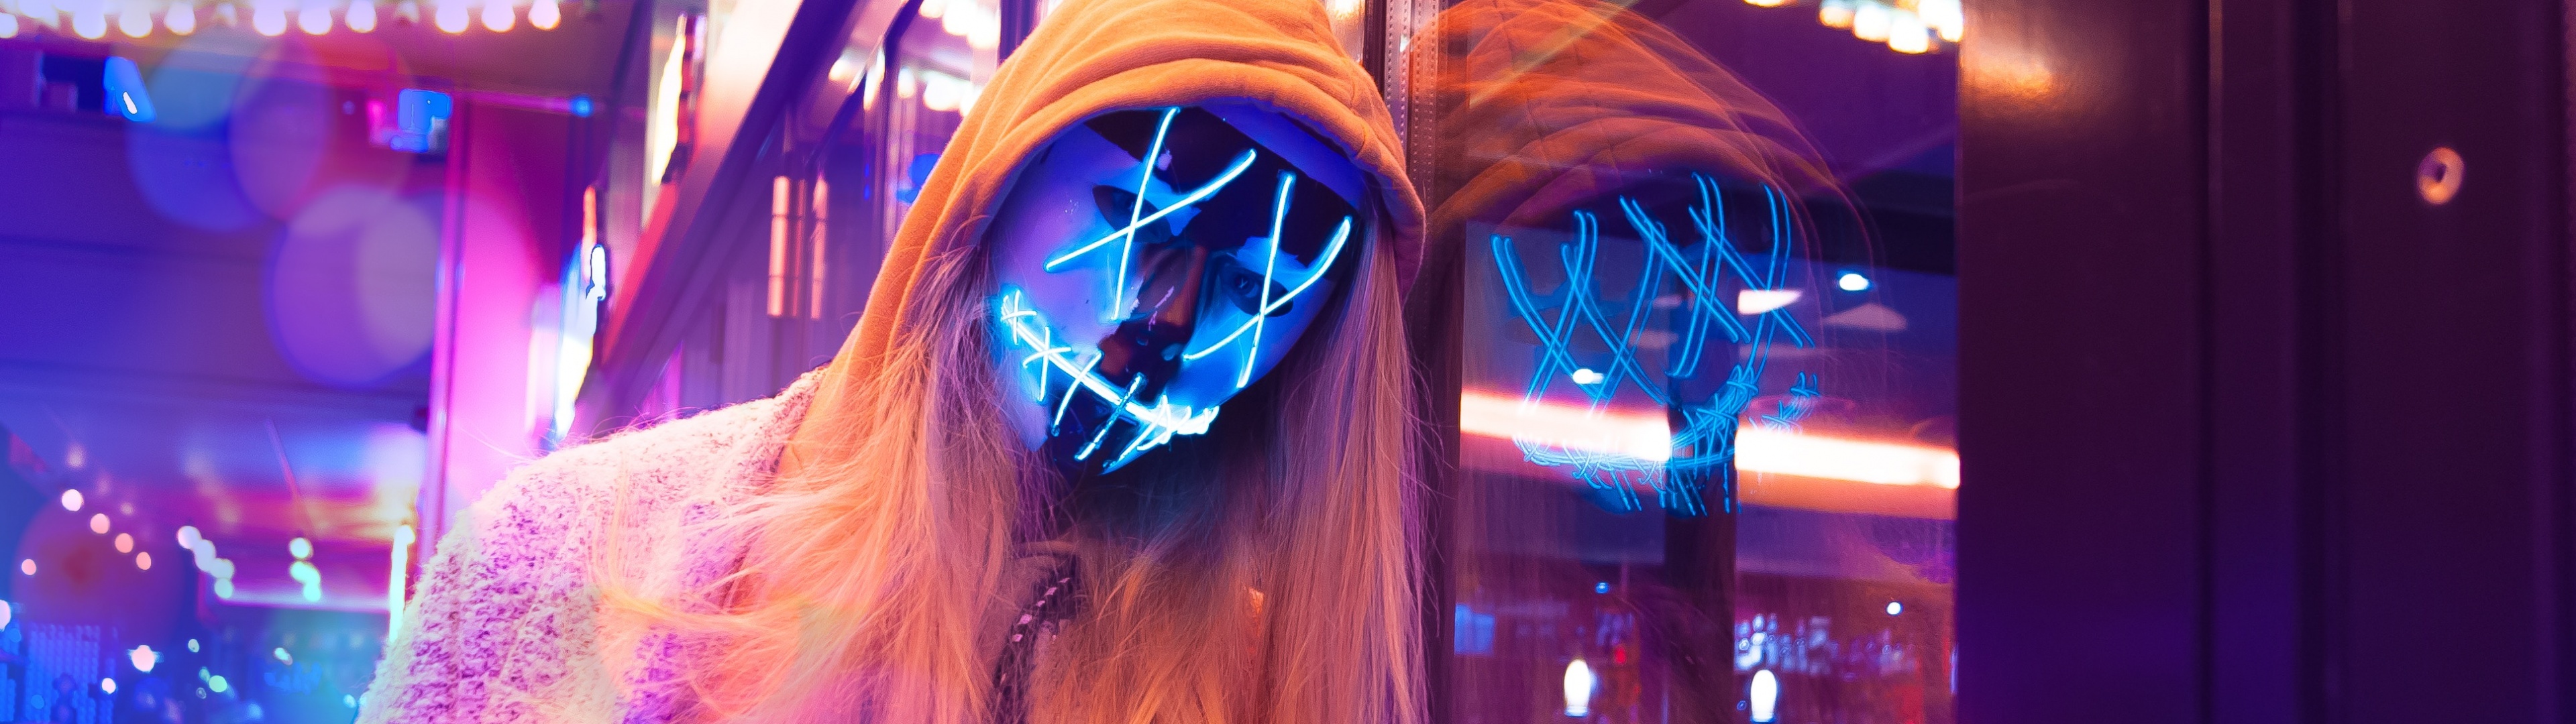 A woman with blonde hair and blue lighting - Neon pink